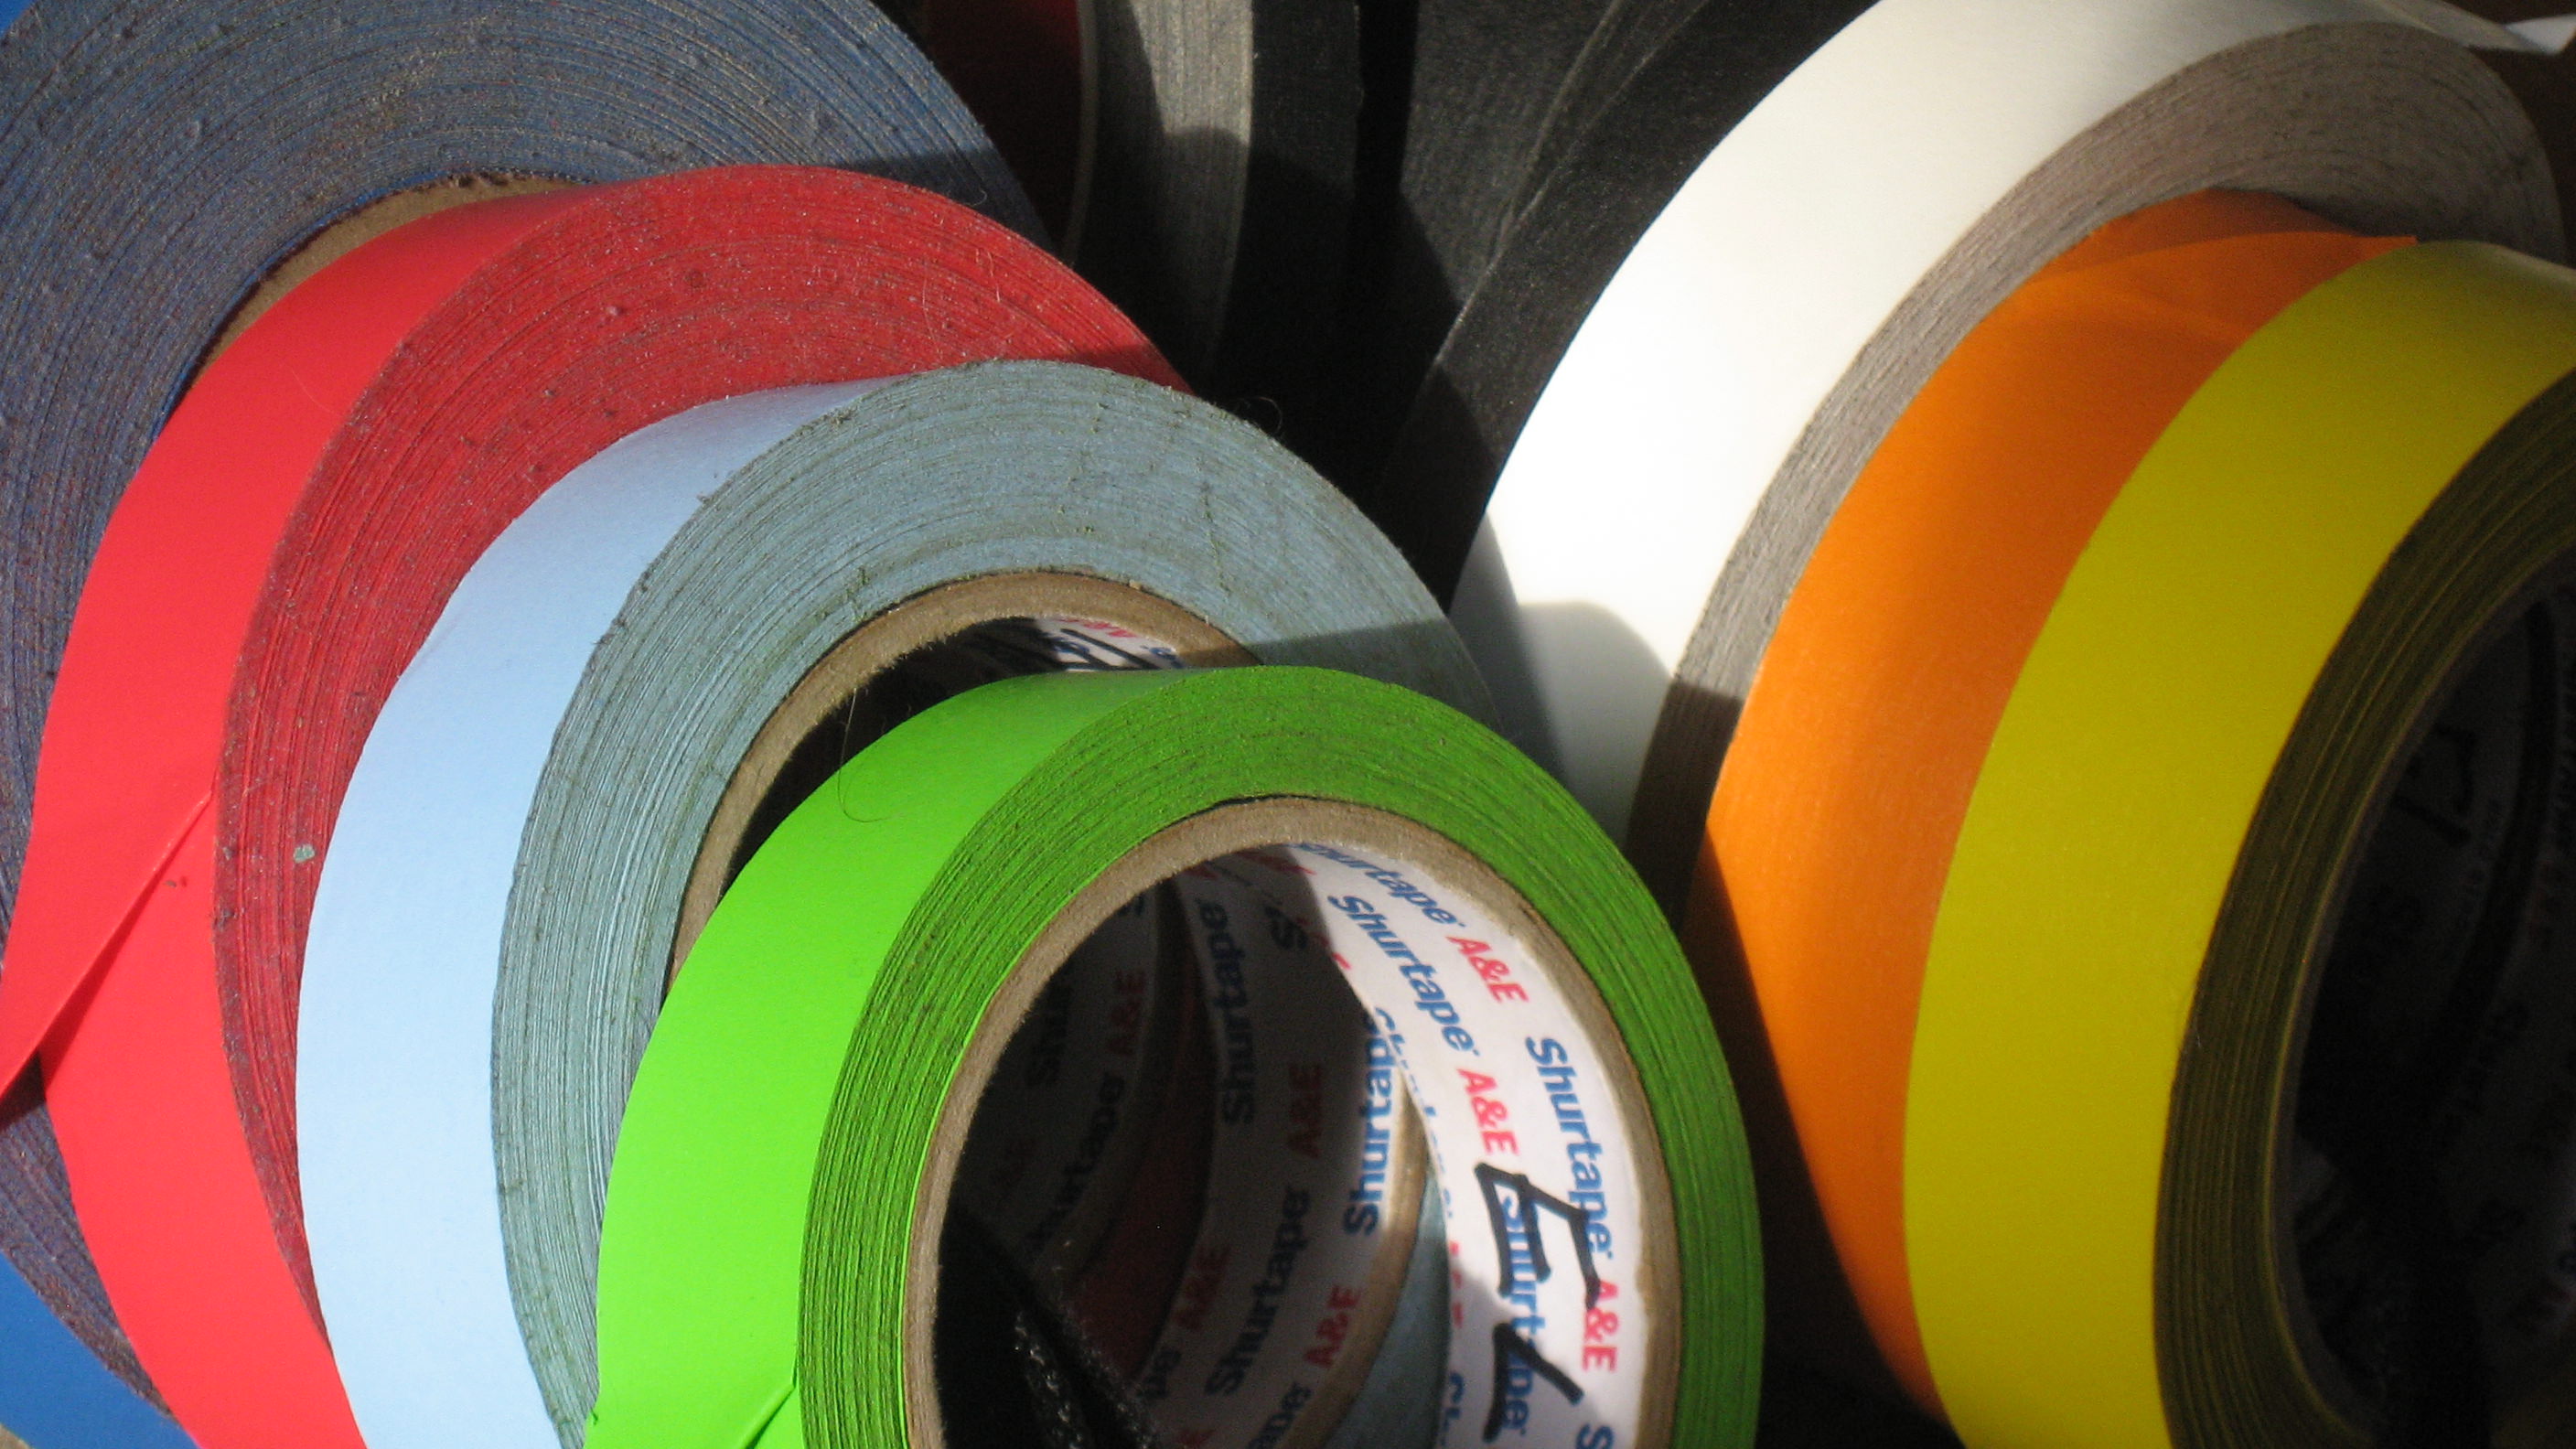 Gaffer Tape Buying Guide - Types, Sizes and Uses